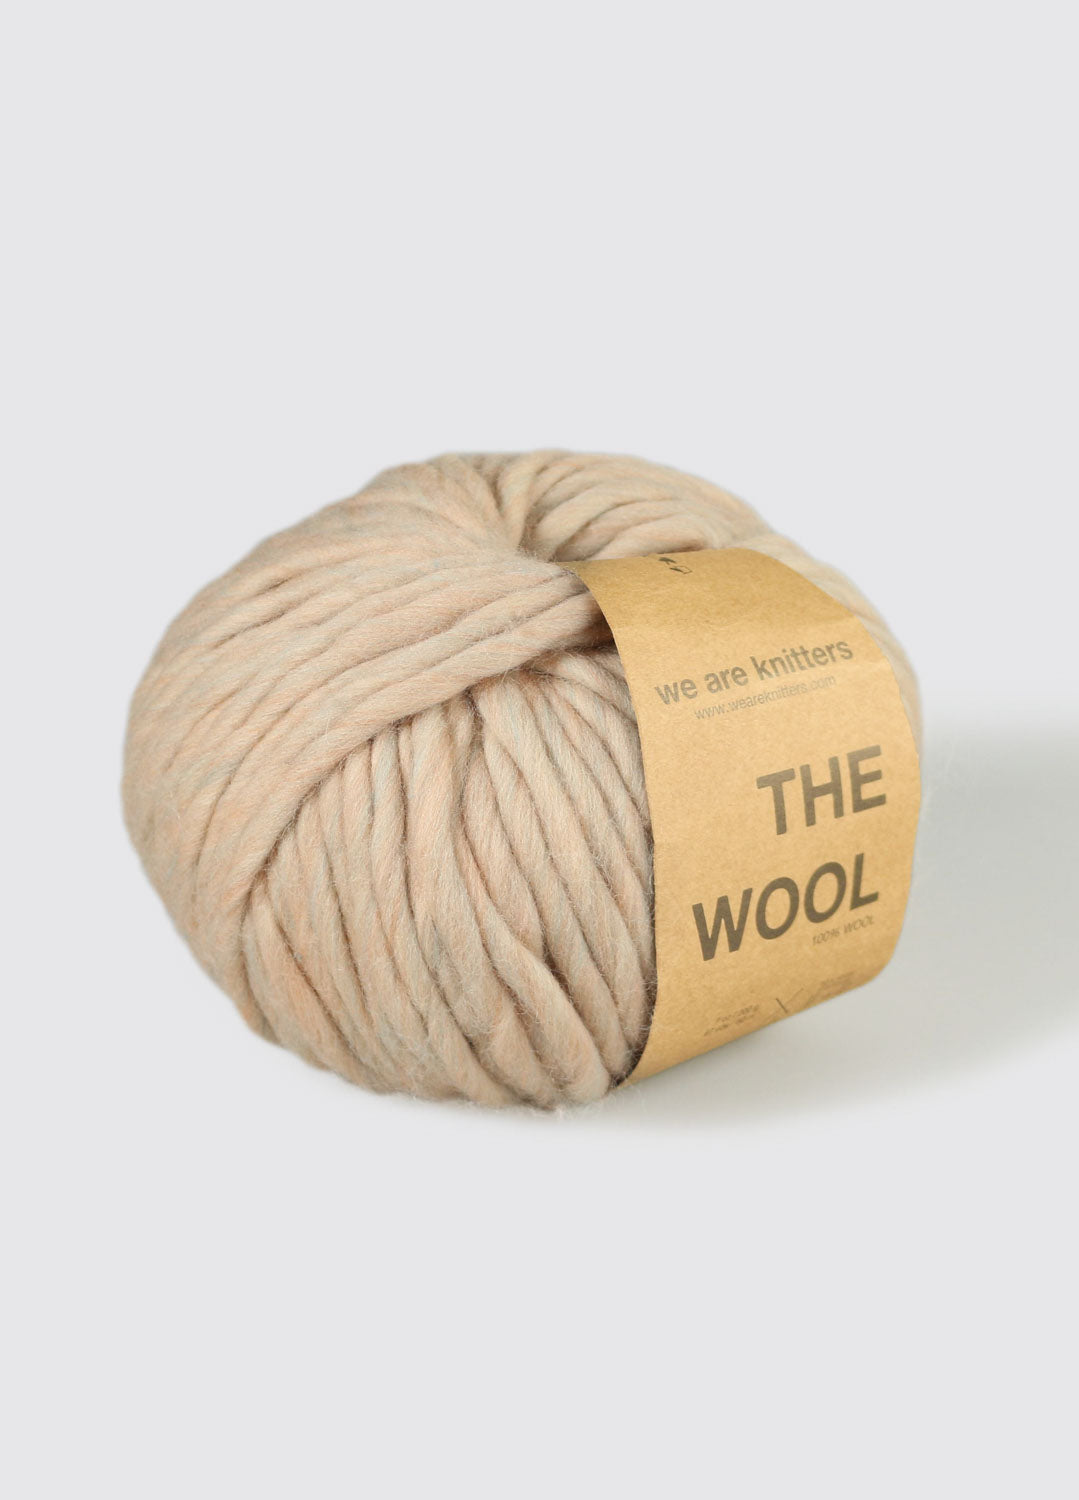 The Wool #skylovers